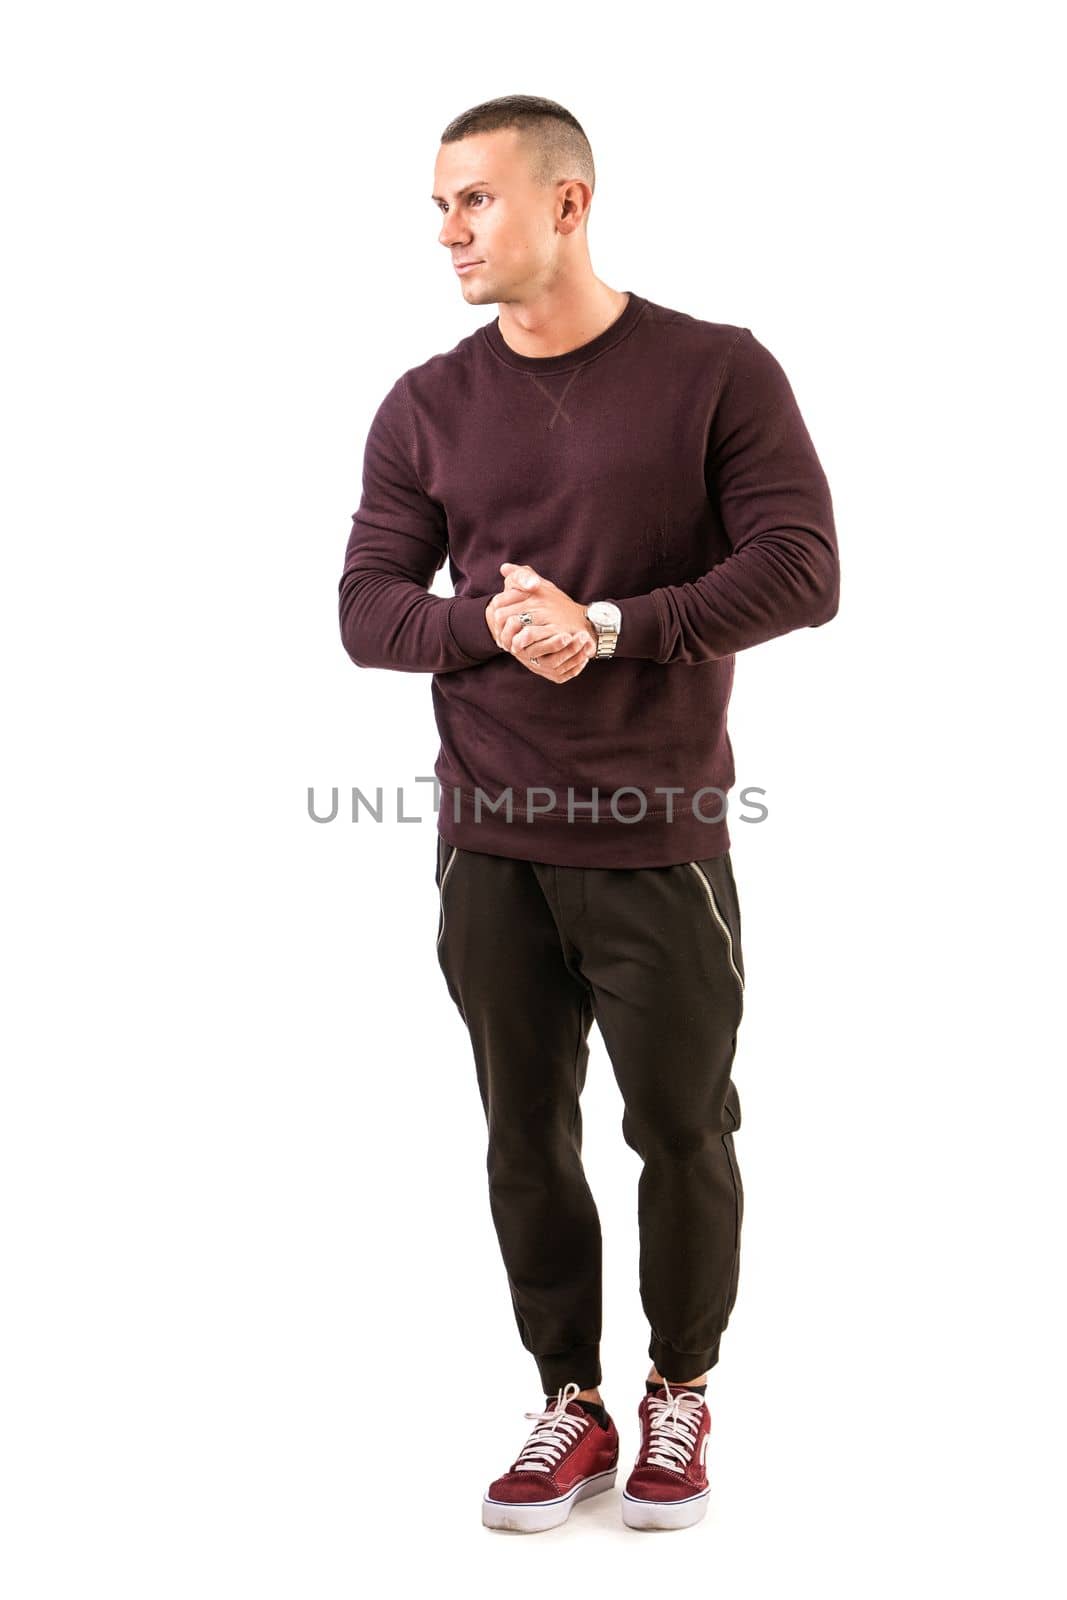 Handsome young man standing with dark shirt, full length body shot, isolated